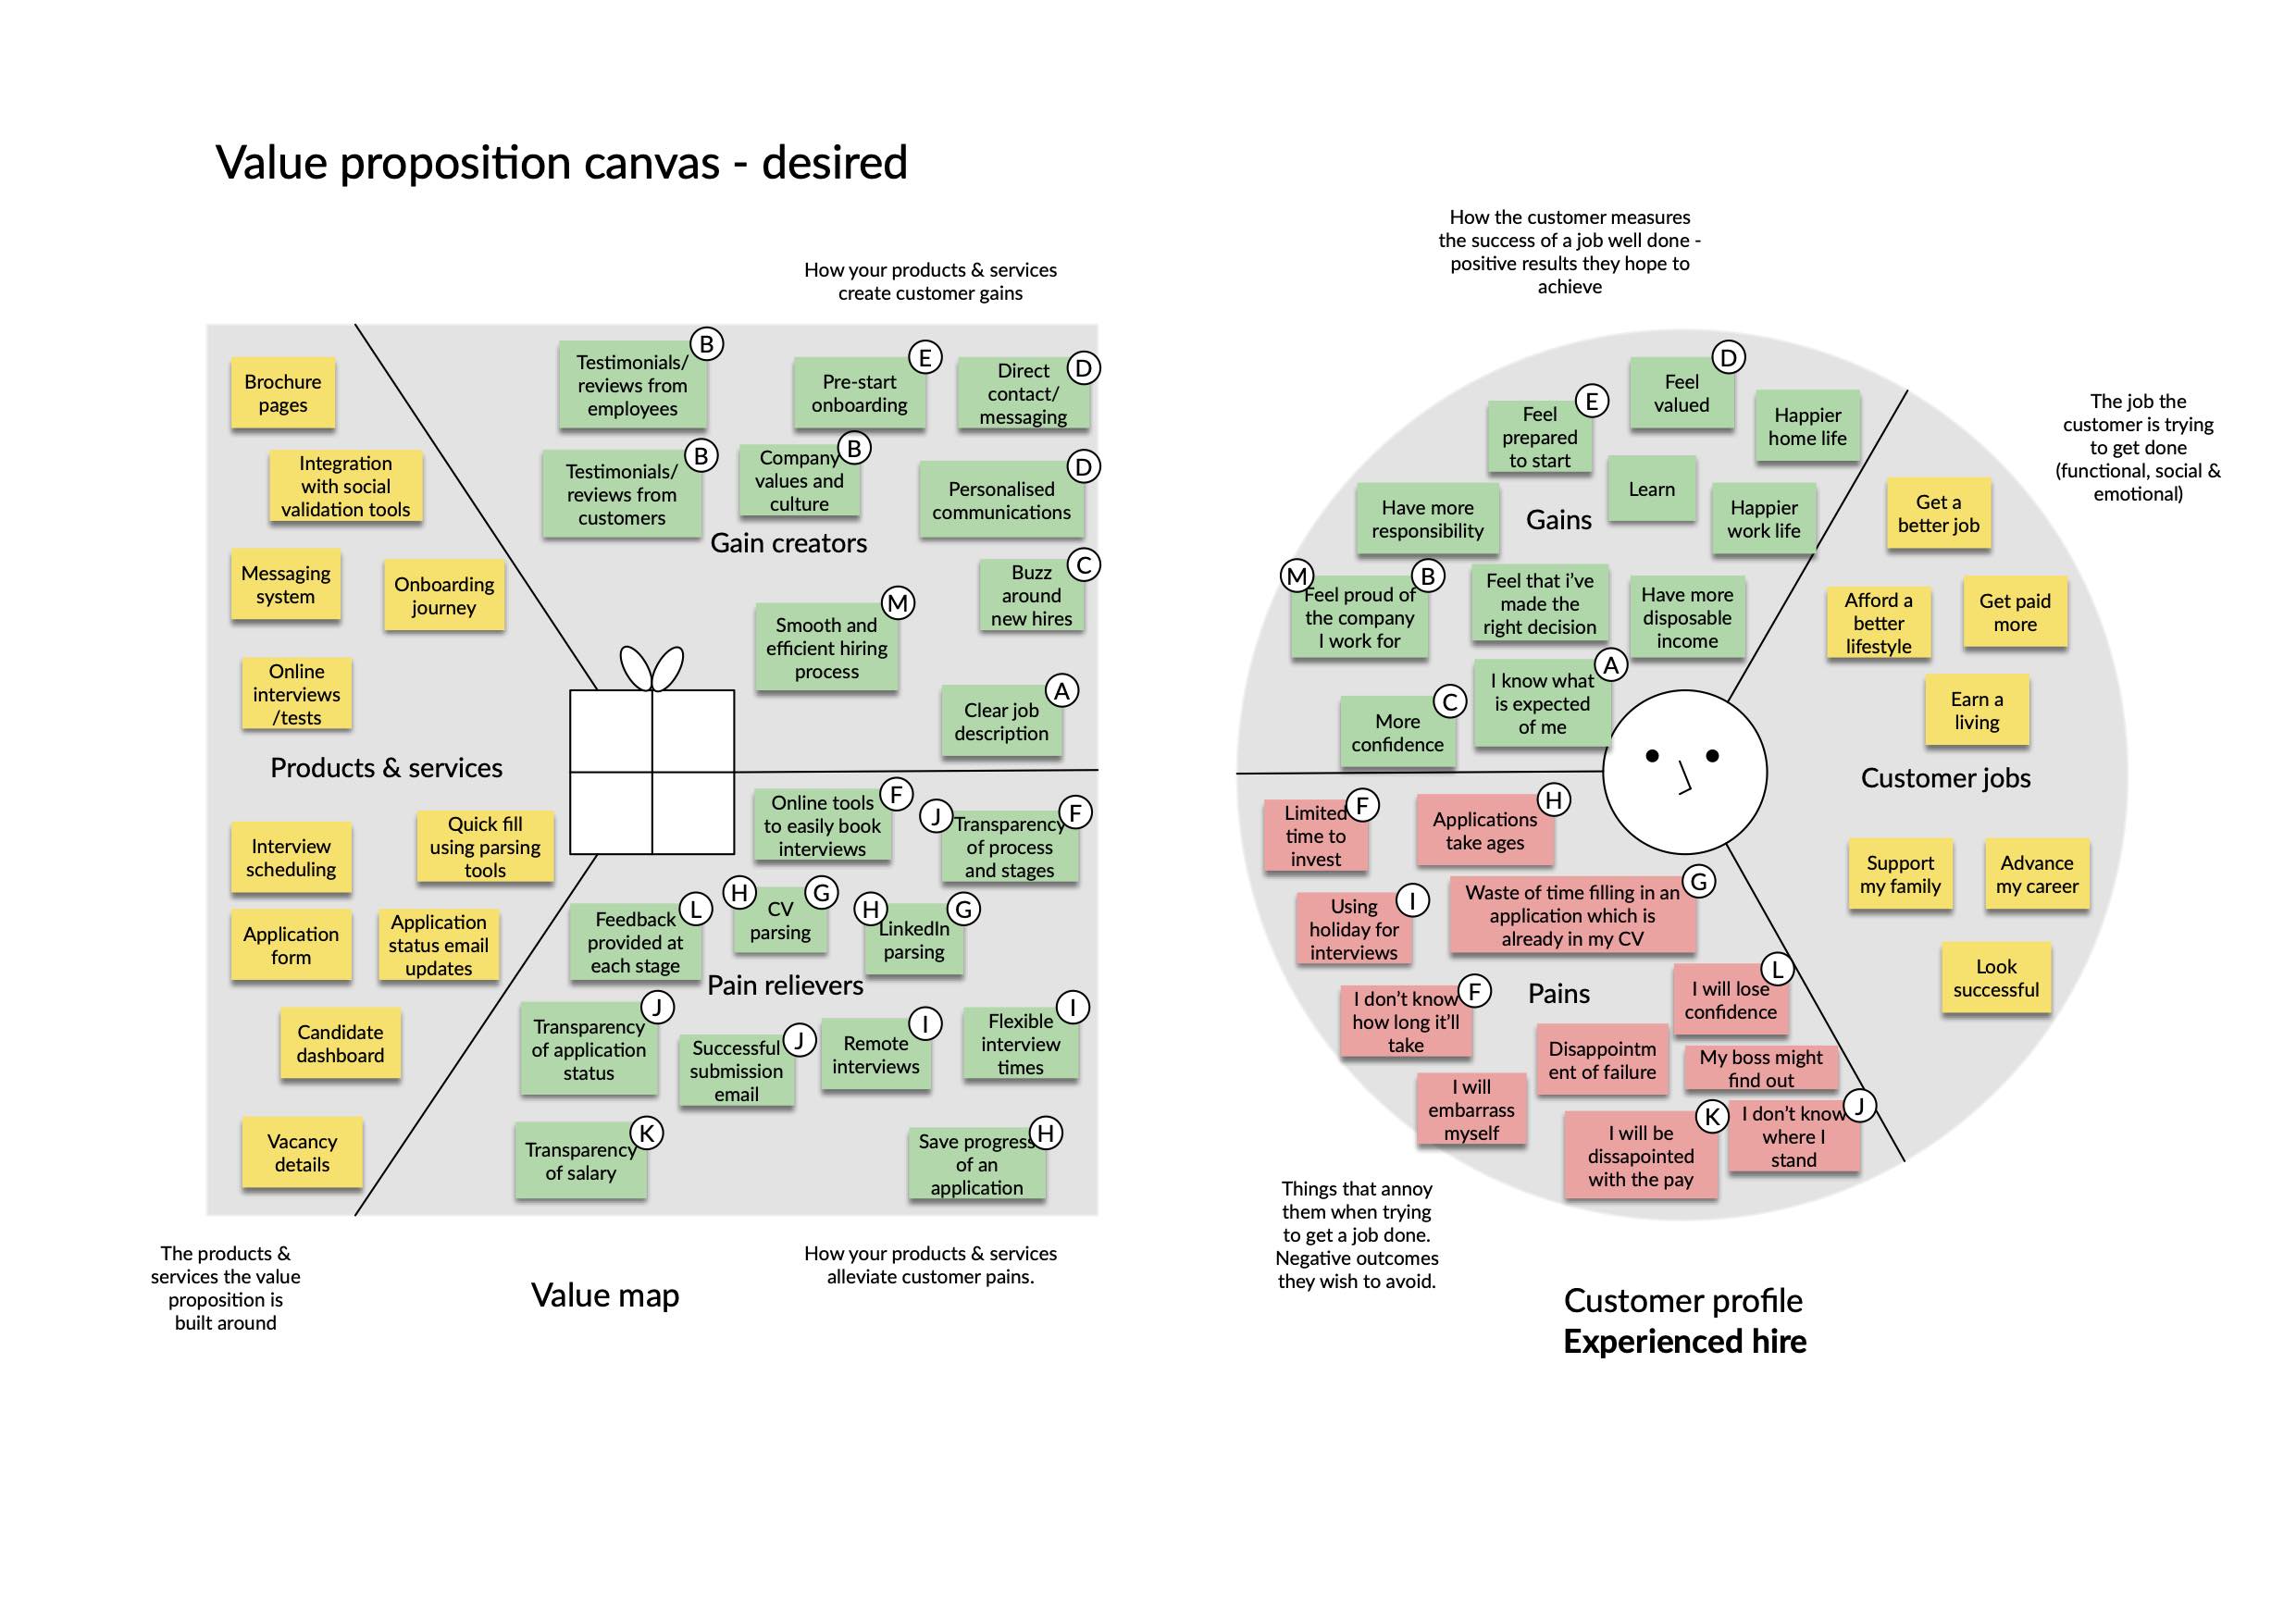 Experienced hire value proposition canvas